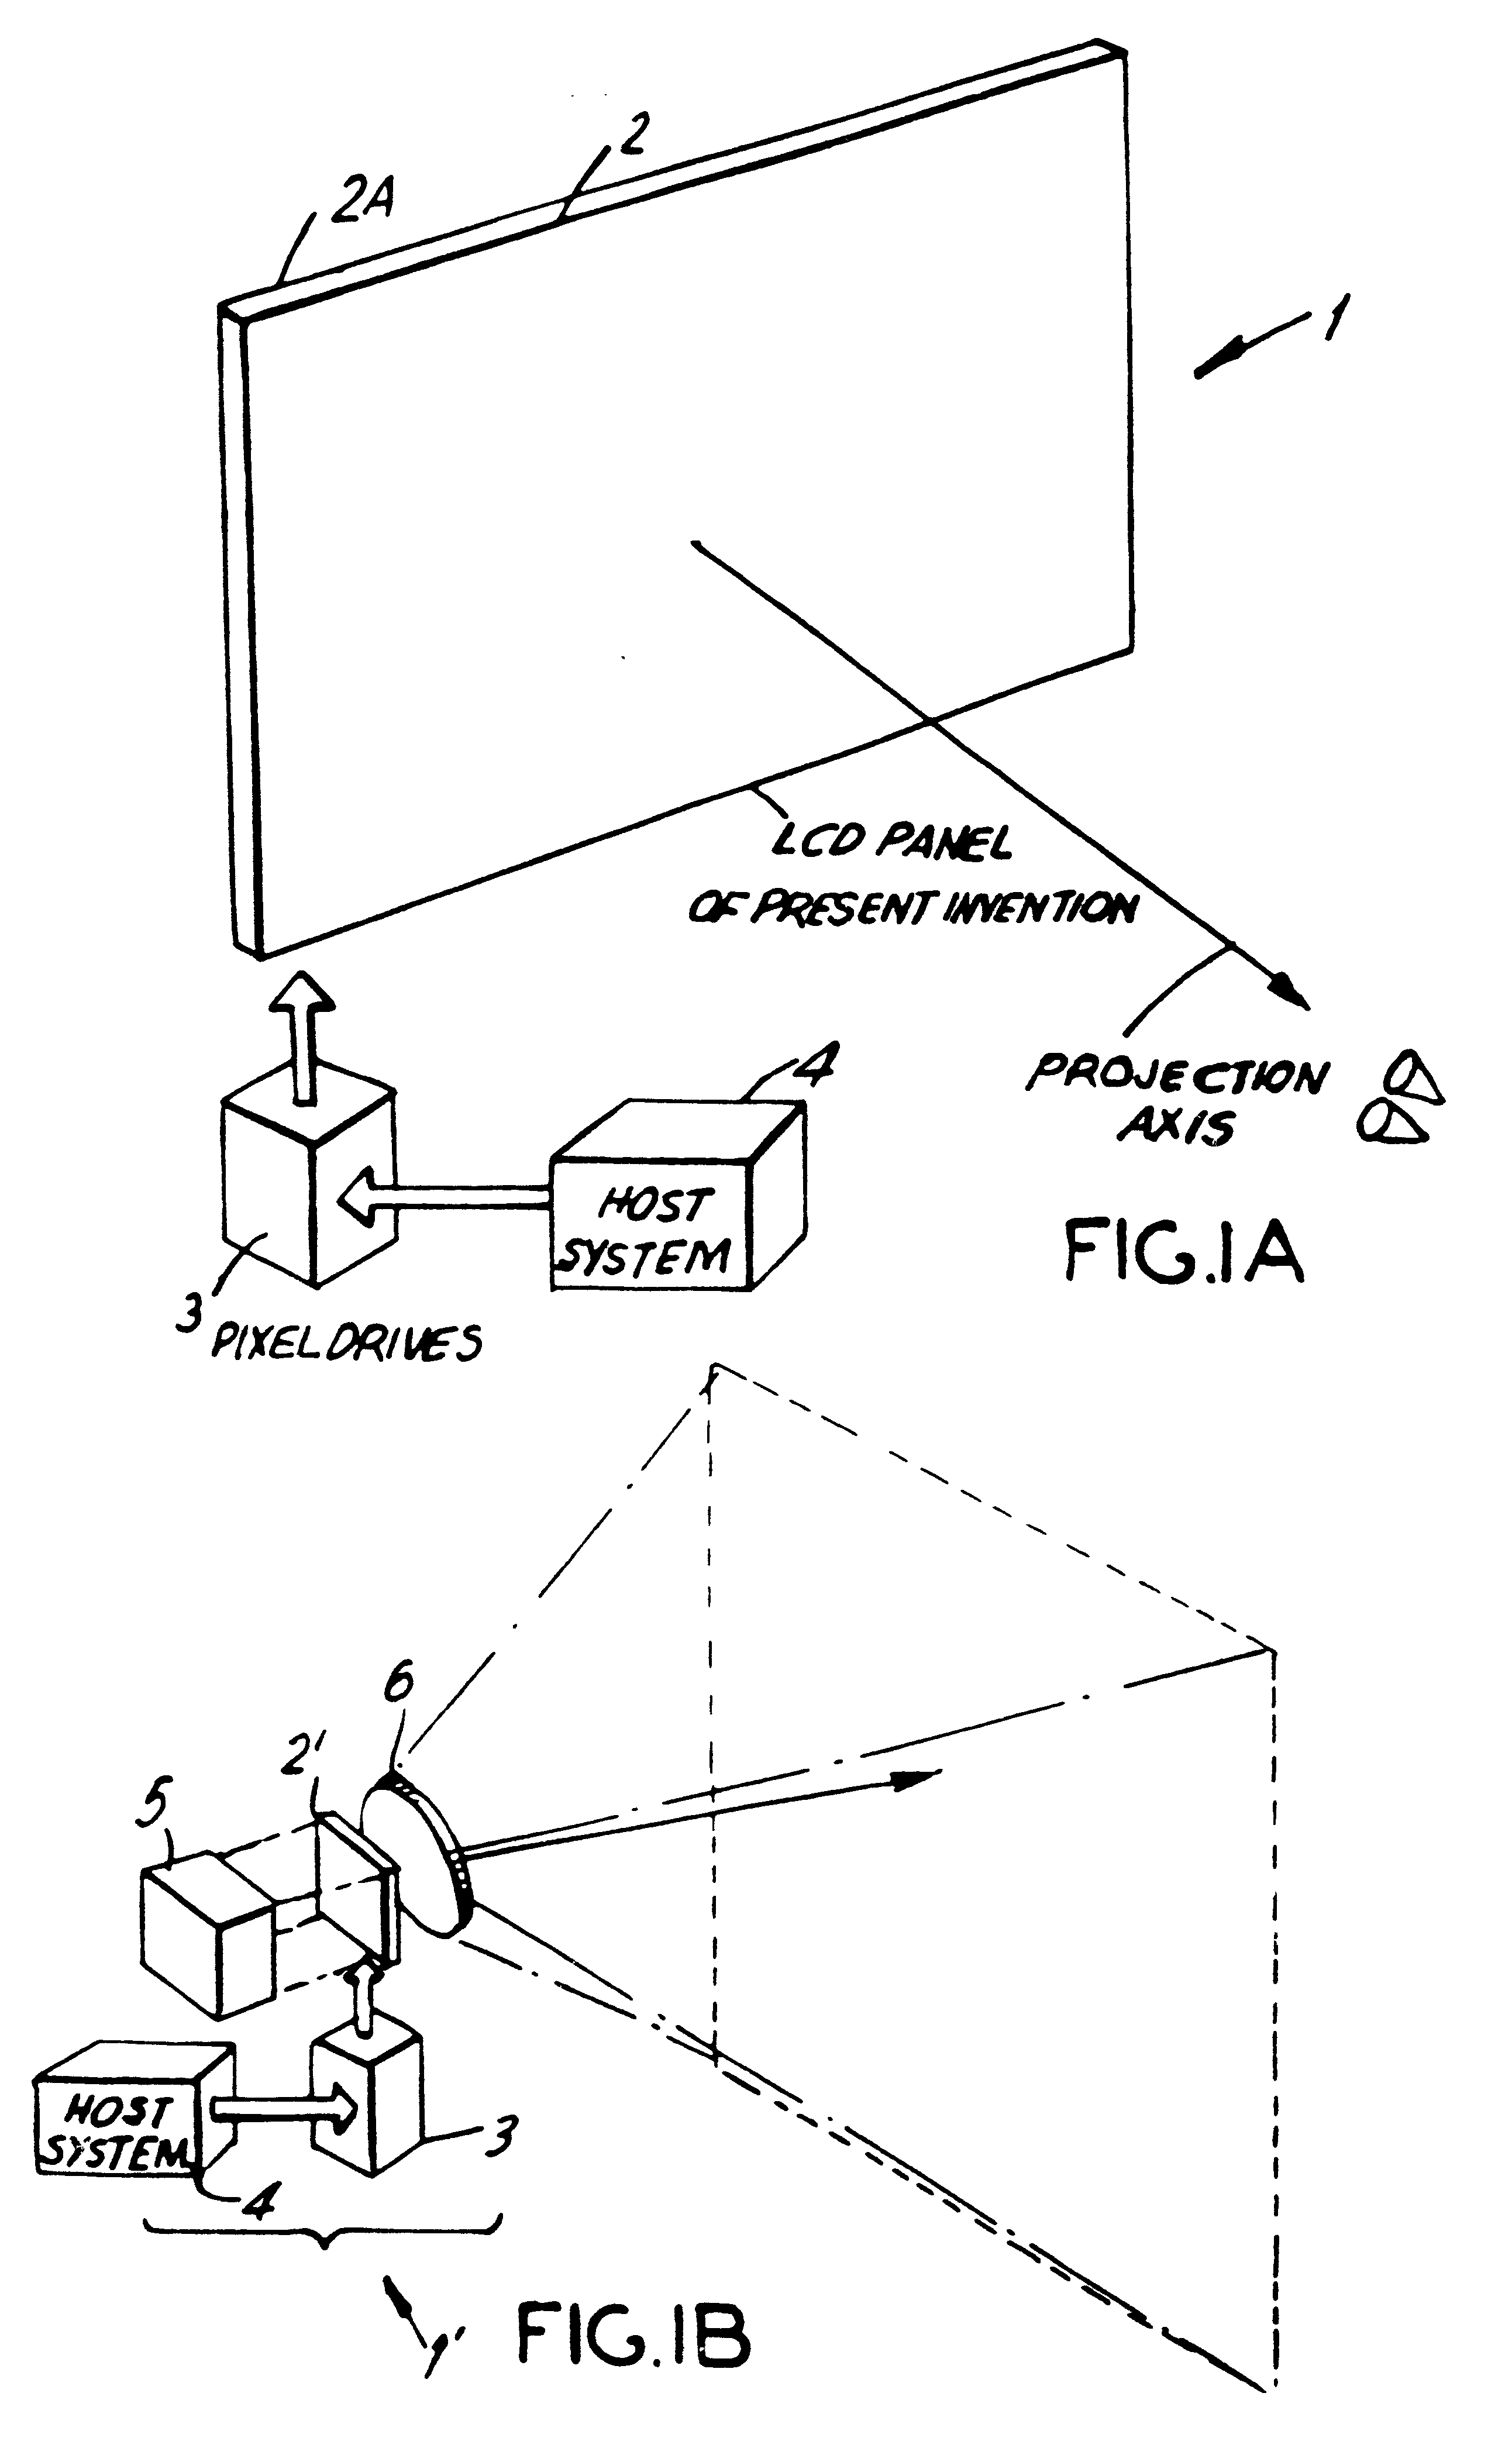 Image display panel employing a broad-band polarizing/reflective backlighting structure and a pixelated array of reflective-type of filtering elements